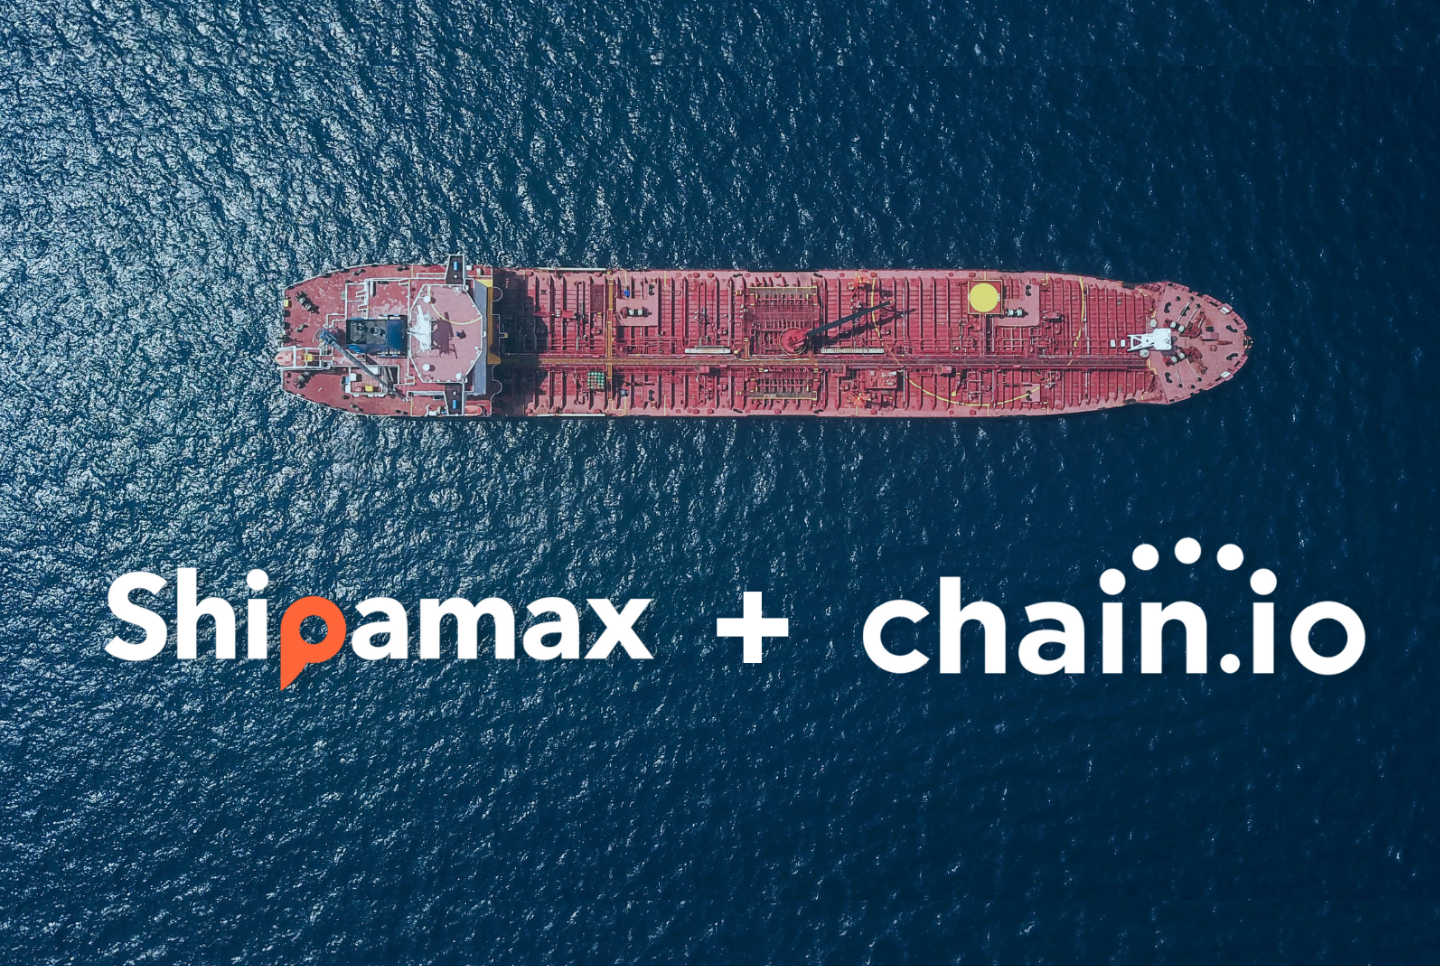 Ship sailing through ocean, Shipamax and Chain.io logos: Shipamax’s data automation tools will be integrated into Chain.io’s supply chain network to provide customers further supply chain data visibility.